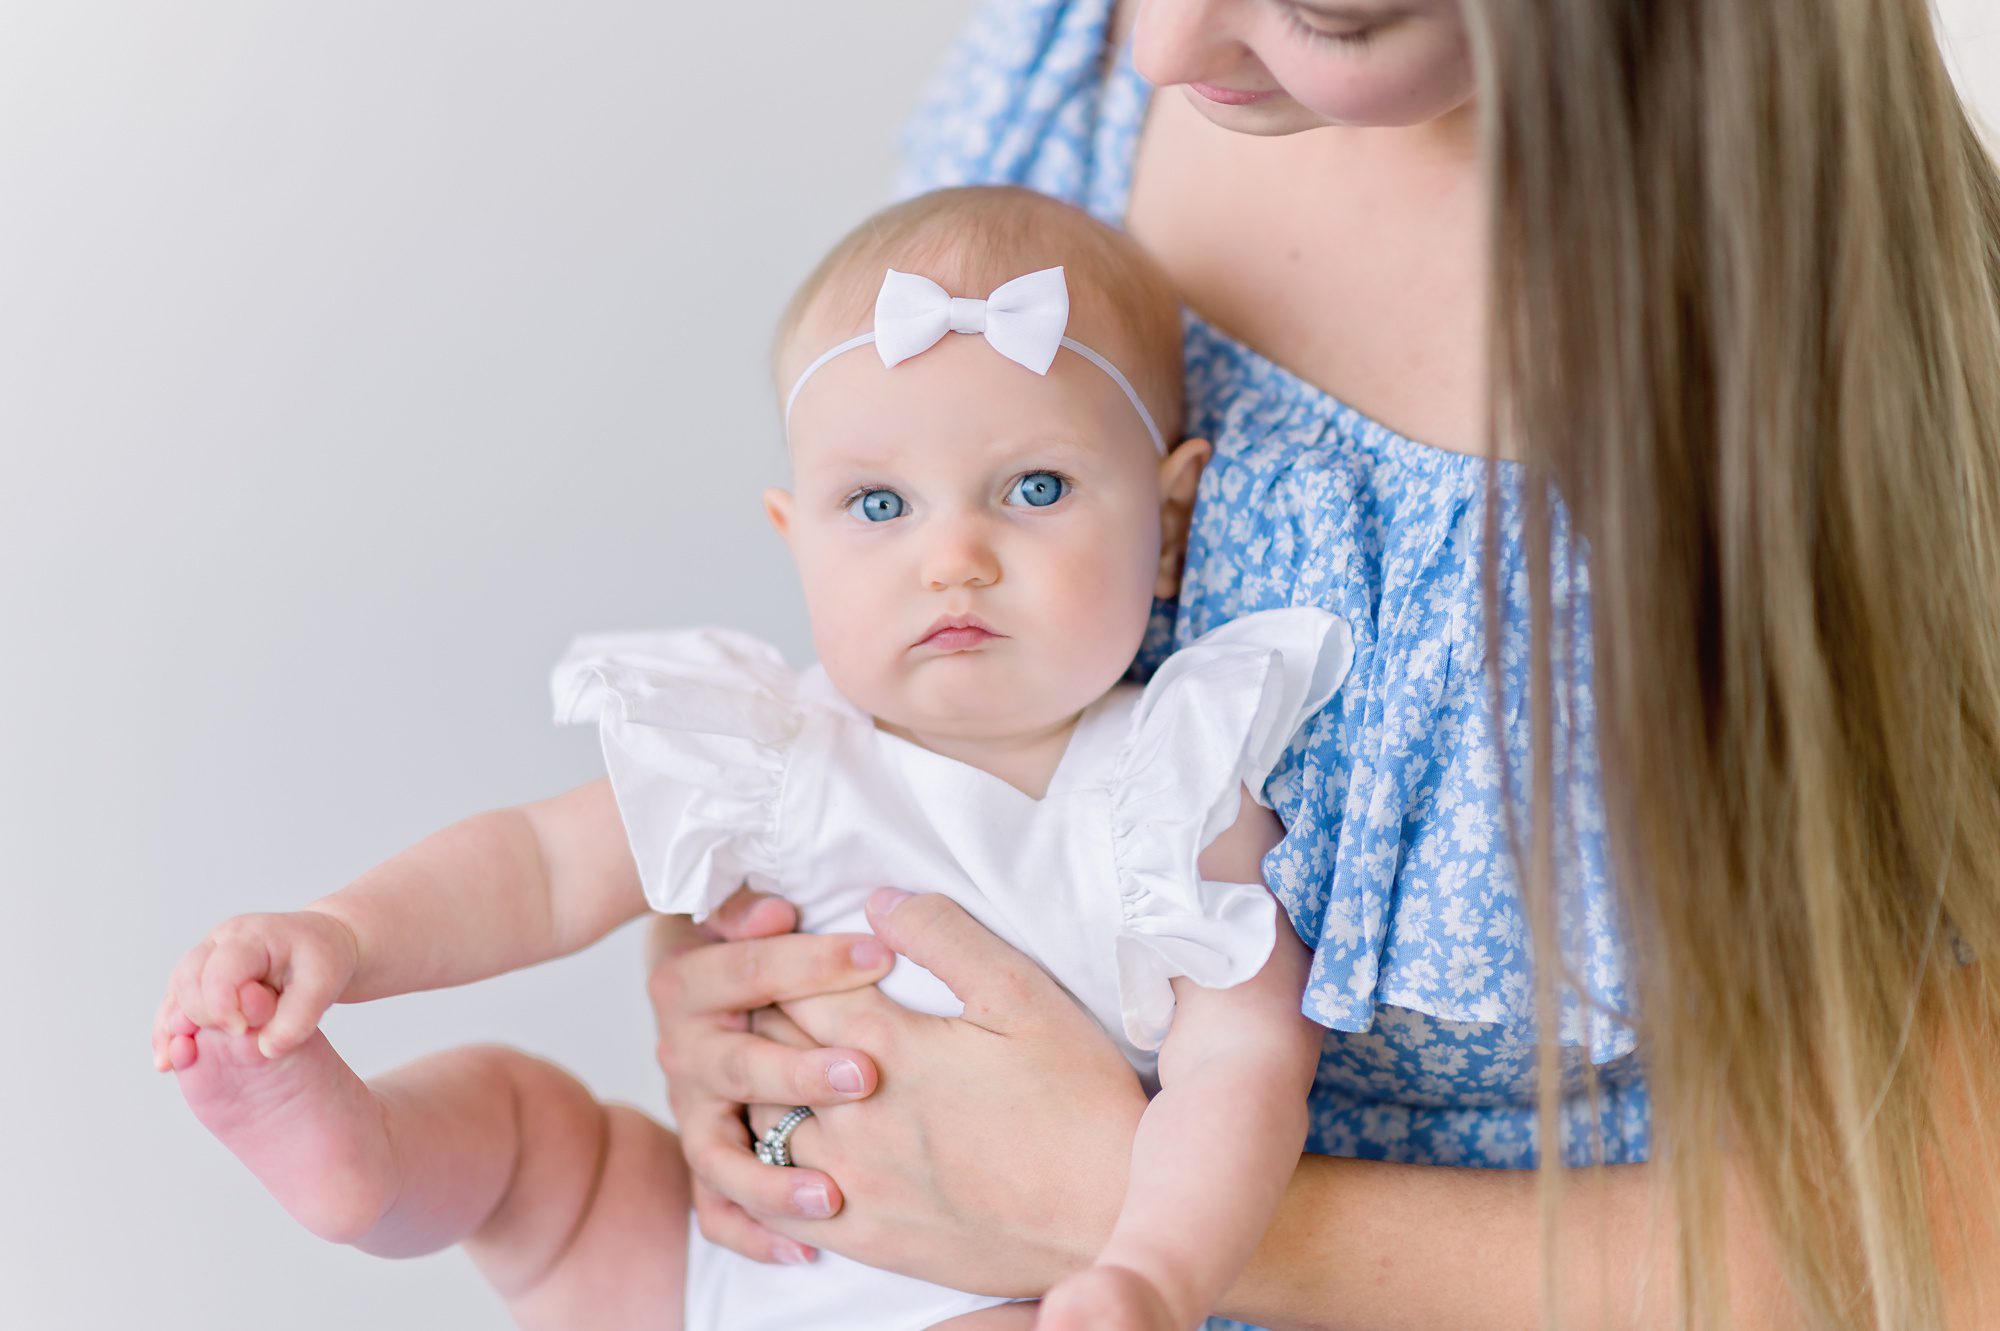 A stunning young mom gets portraits done in a photography studio in Denver with her adorable 7 month old daughter.